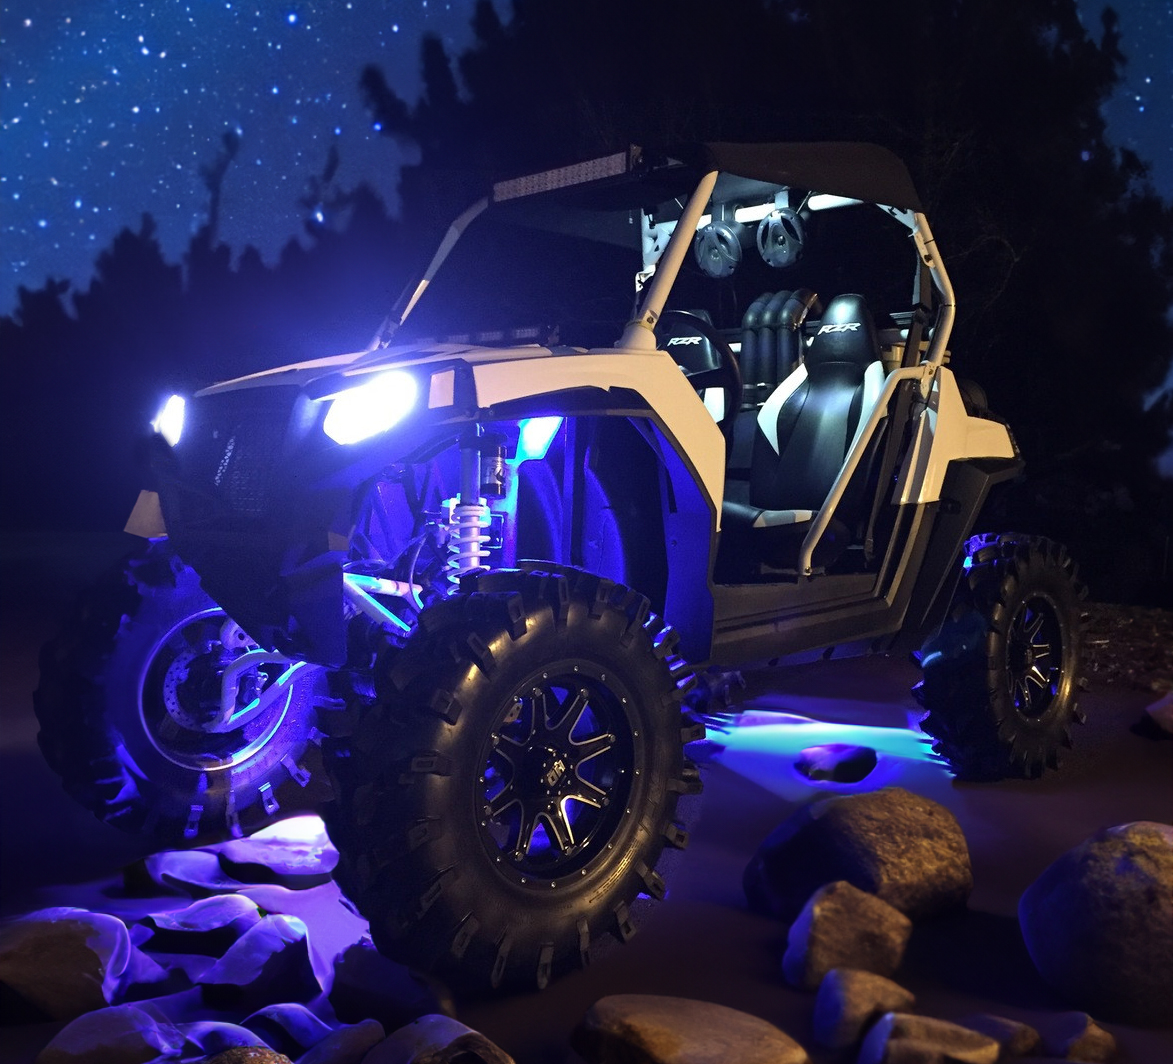 What Are The Best Rock Lights For A UTV? See Our LED Rock Light Guide